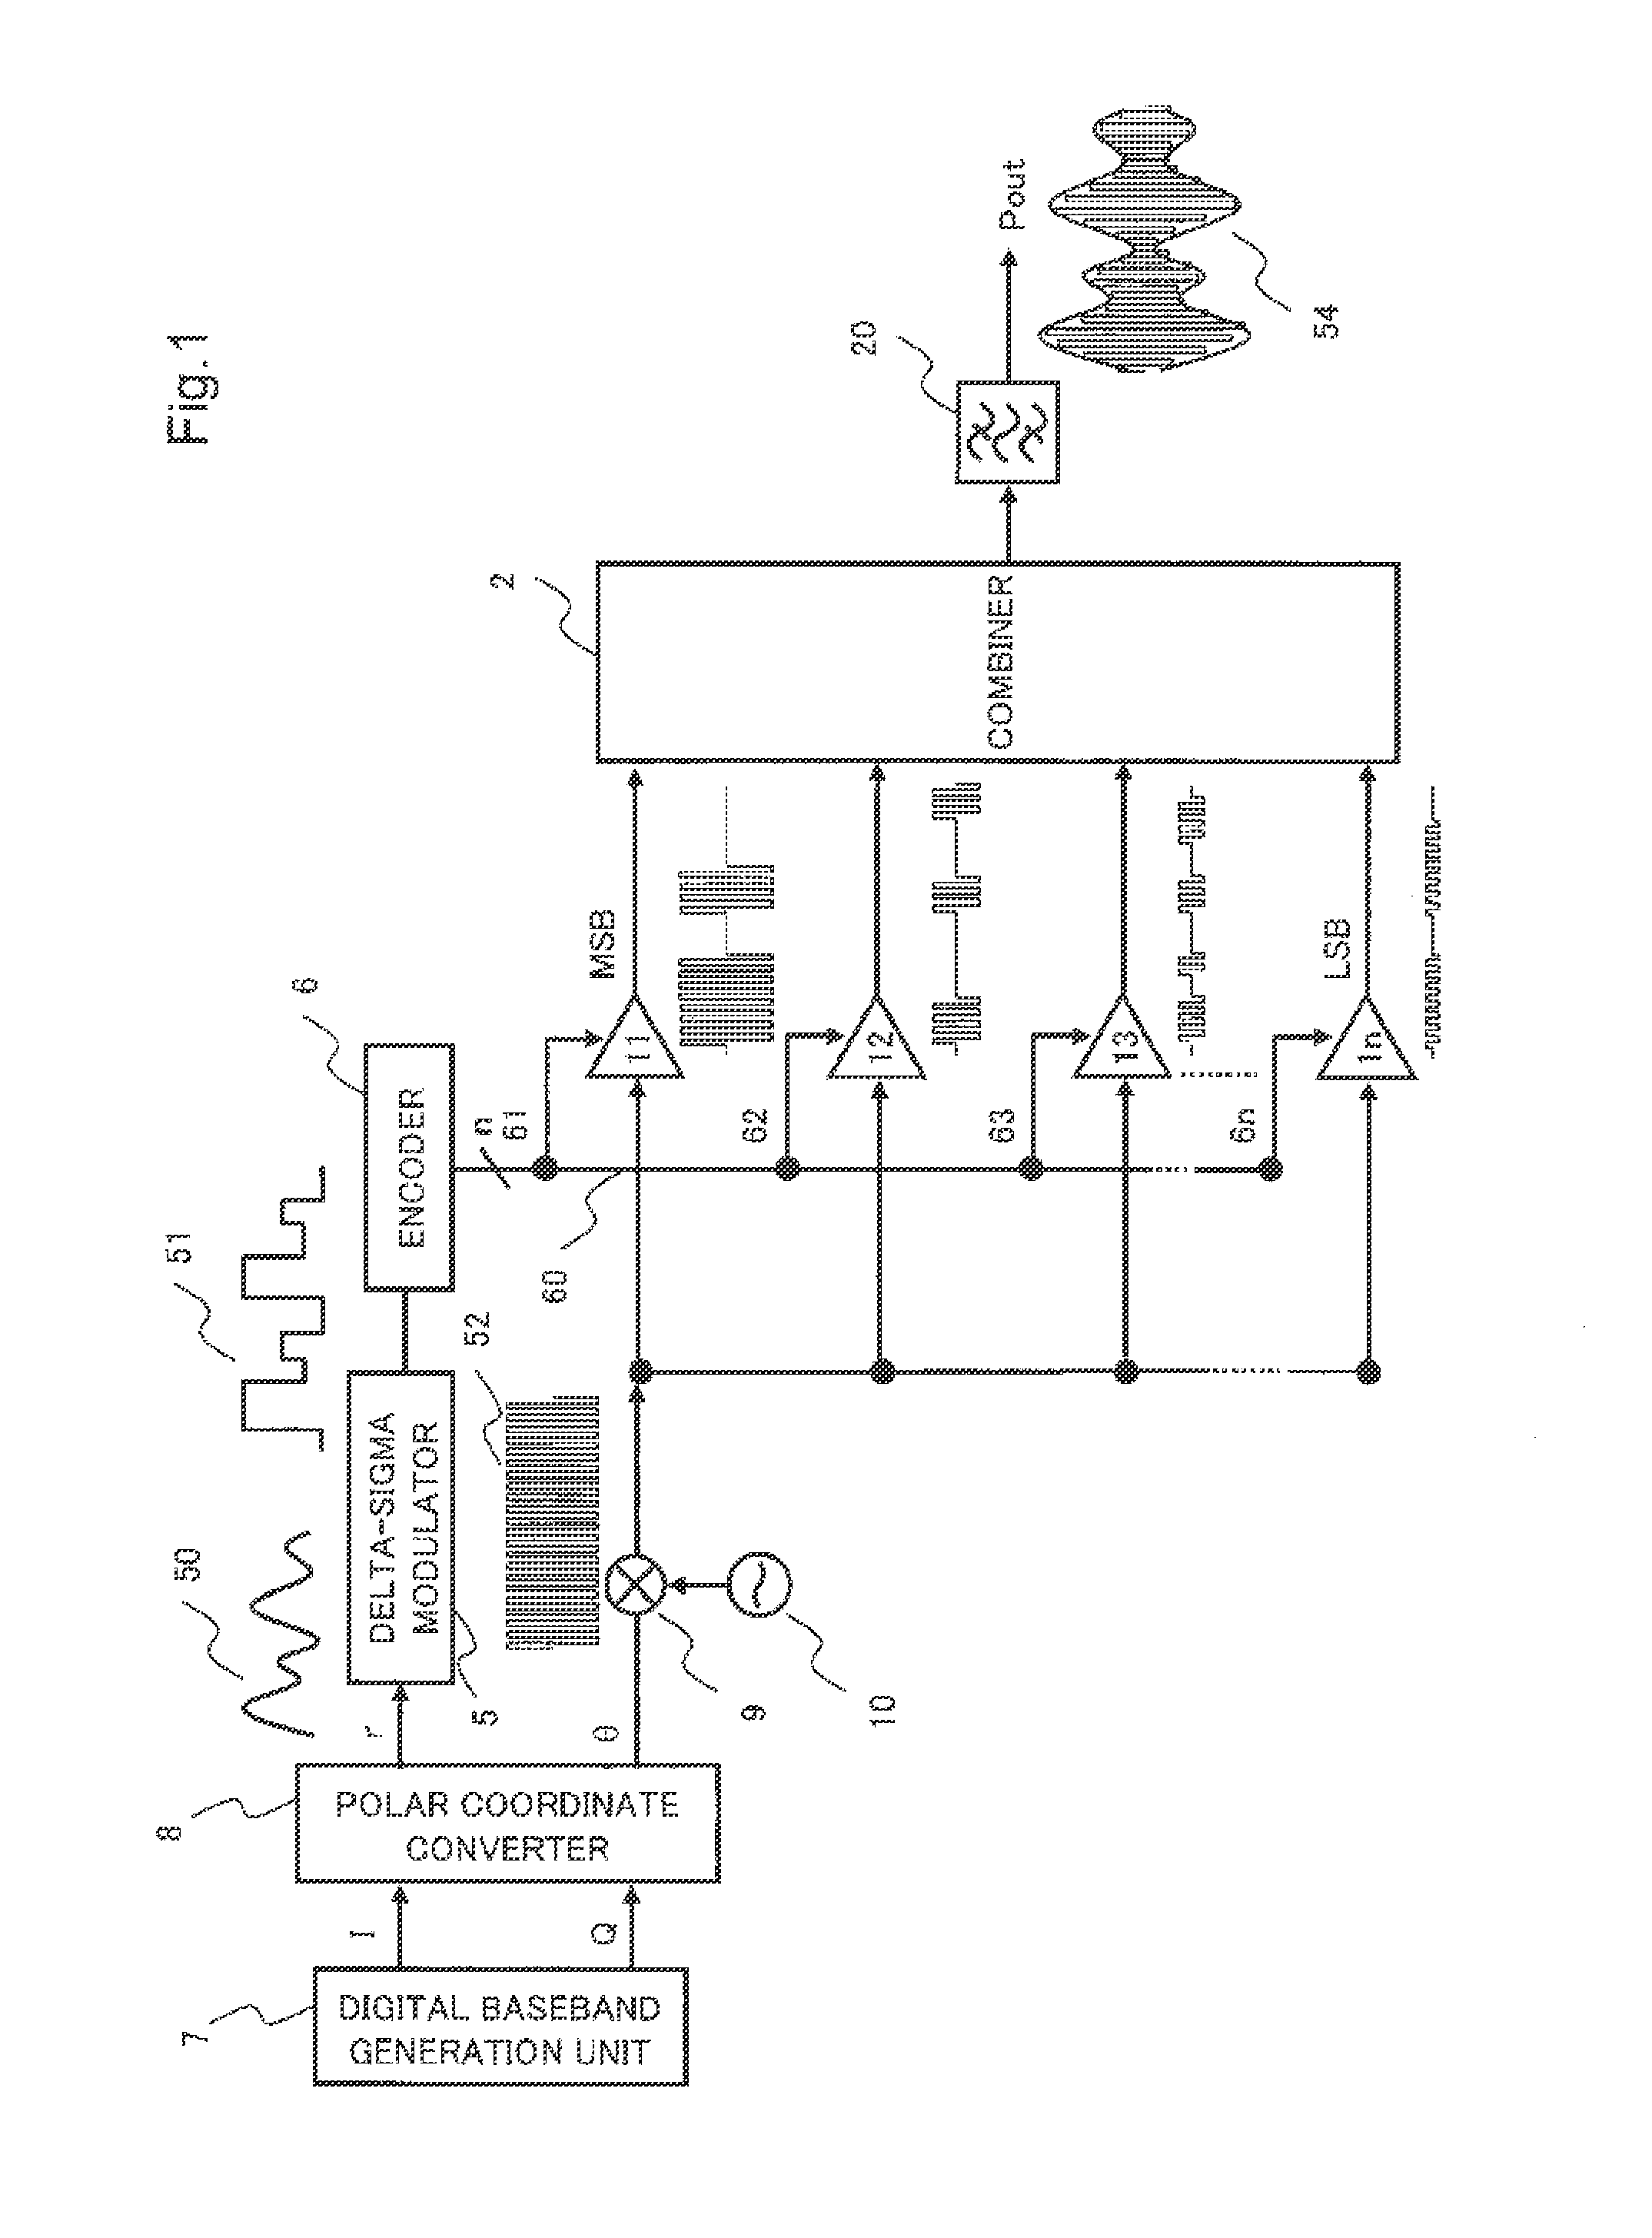 Power amplification device